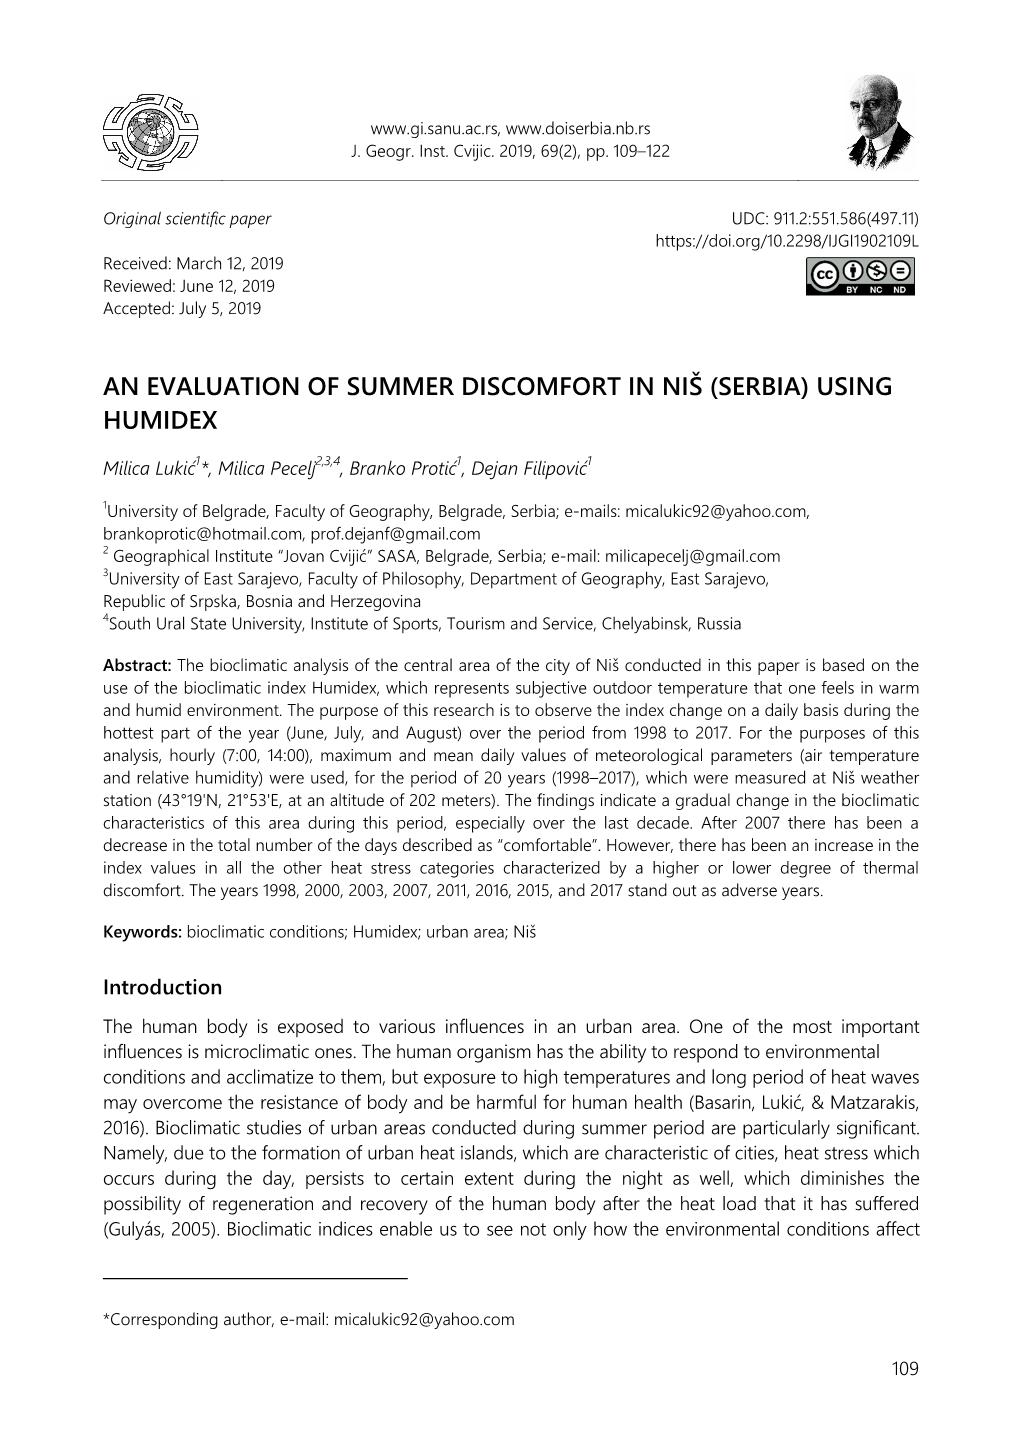 An Evaluation of Summer Discomfort in Niš (Serbia) Using Humidex